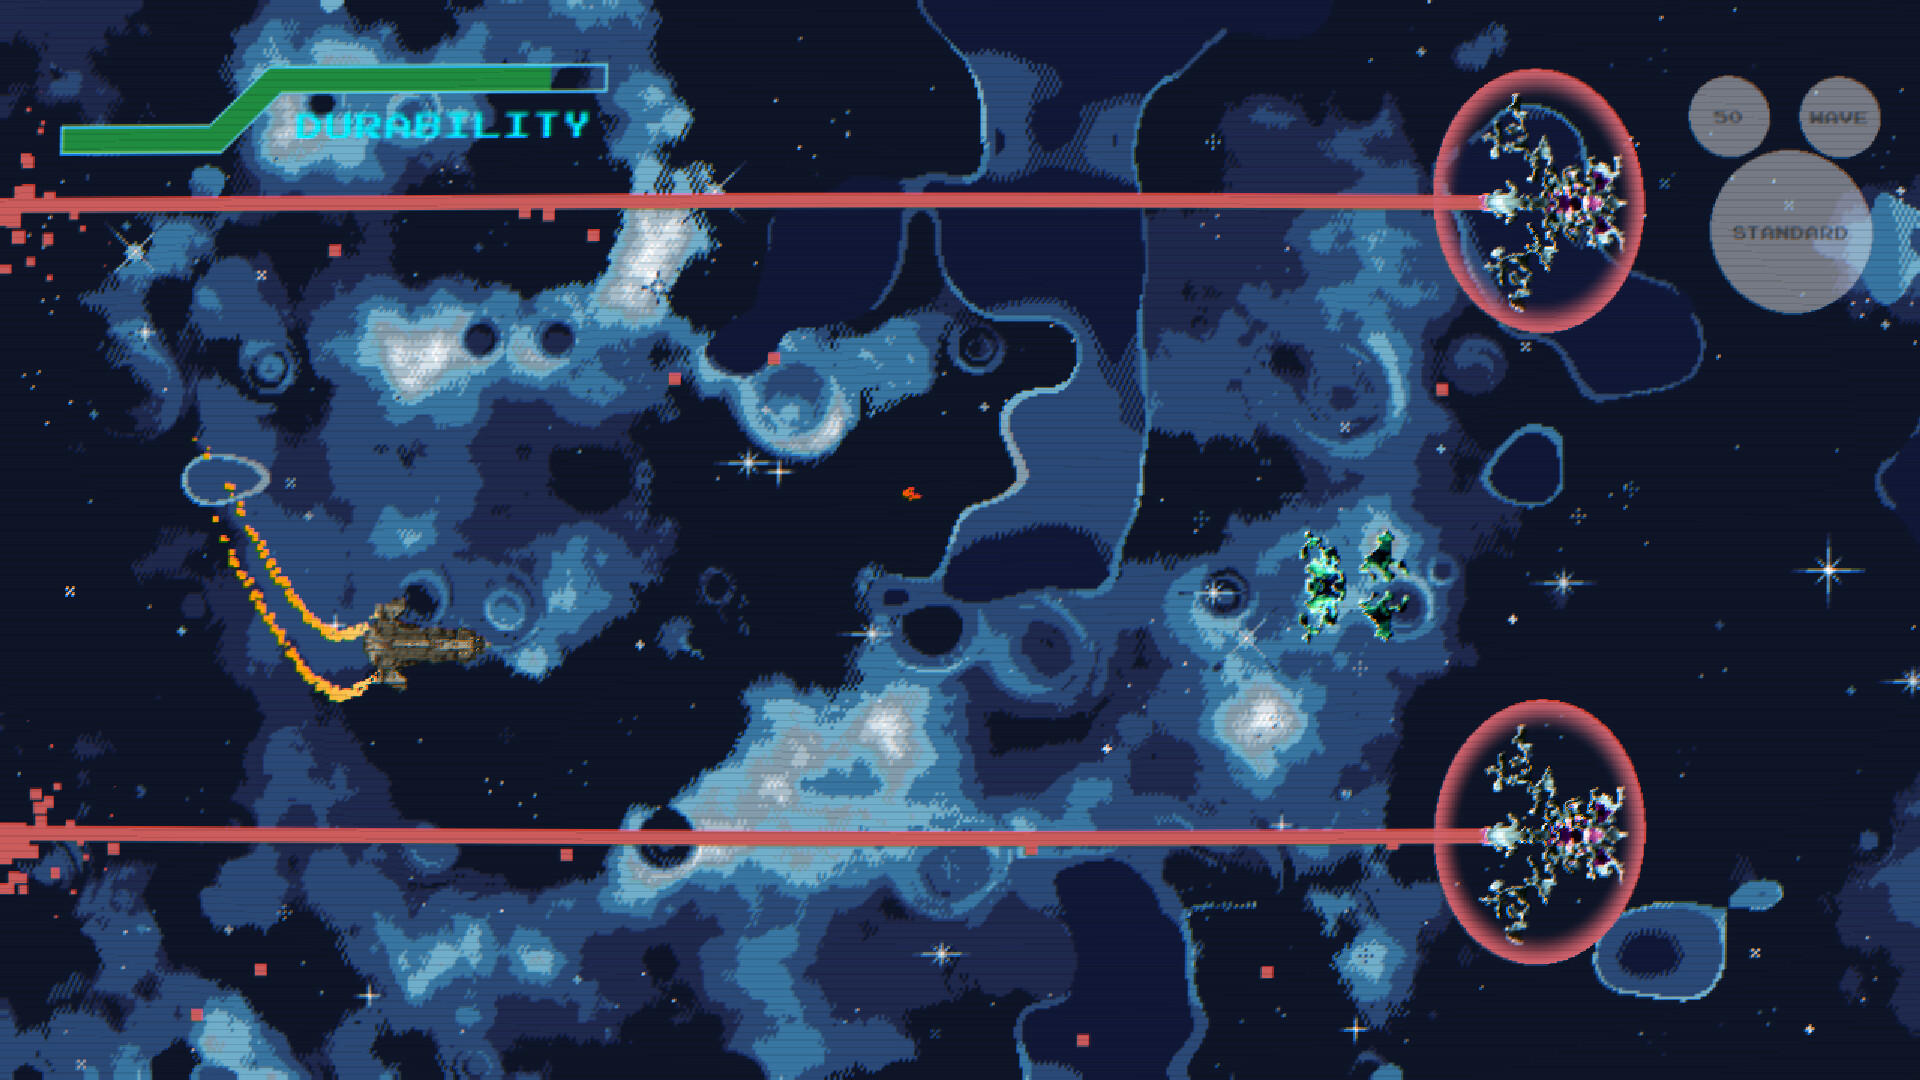 End of Space Project screenshot game